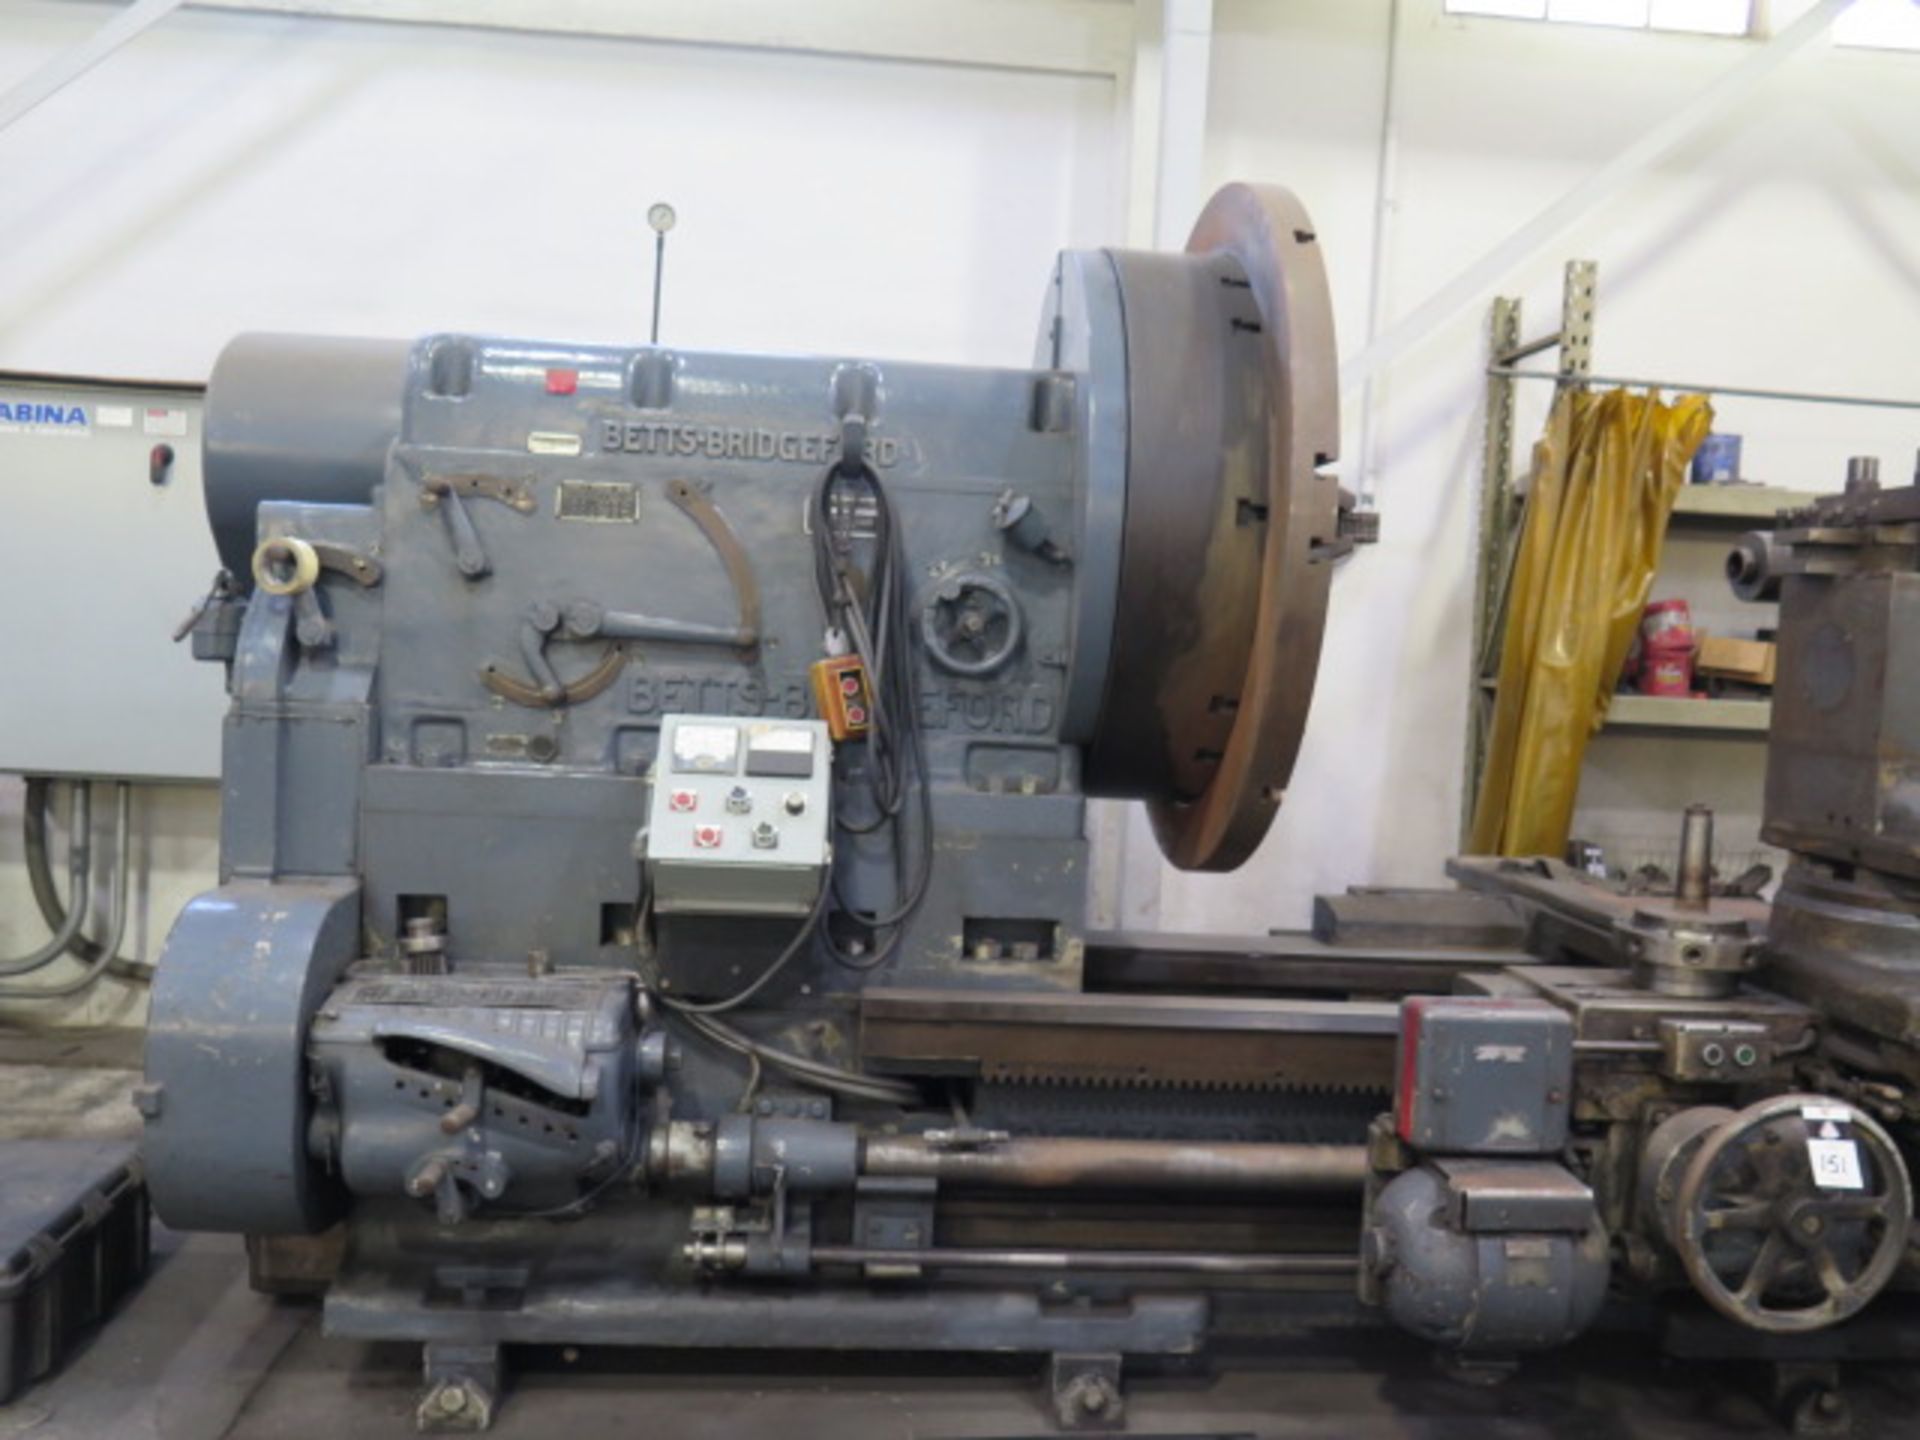 Betts Bridgeford 80” x 300” Lathe s/n E-7799 w/ Upgraded Sabina Control (50Hp DC Motor, SOLD AS IS - Image 3 of 12